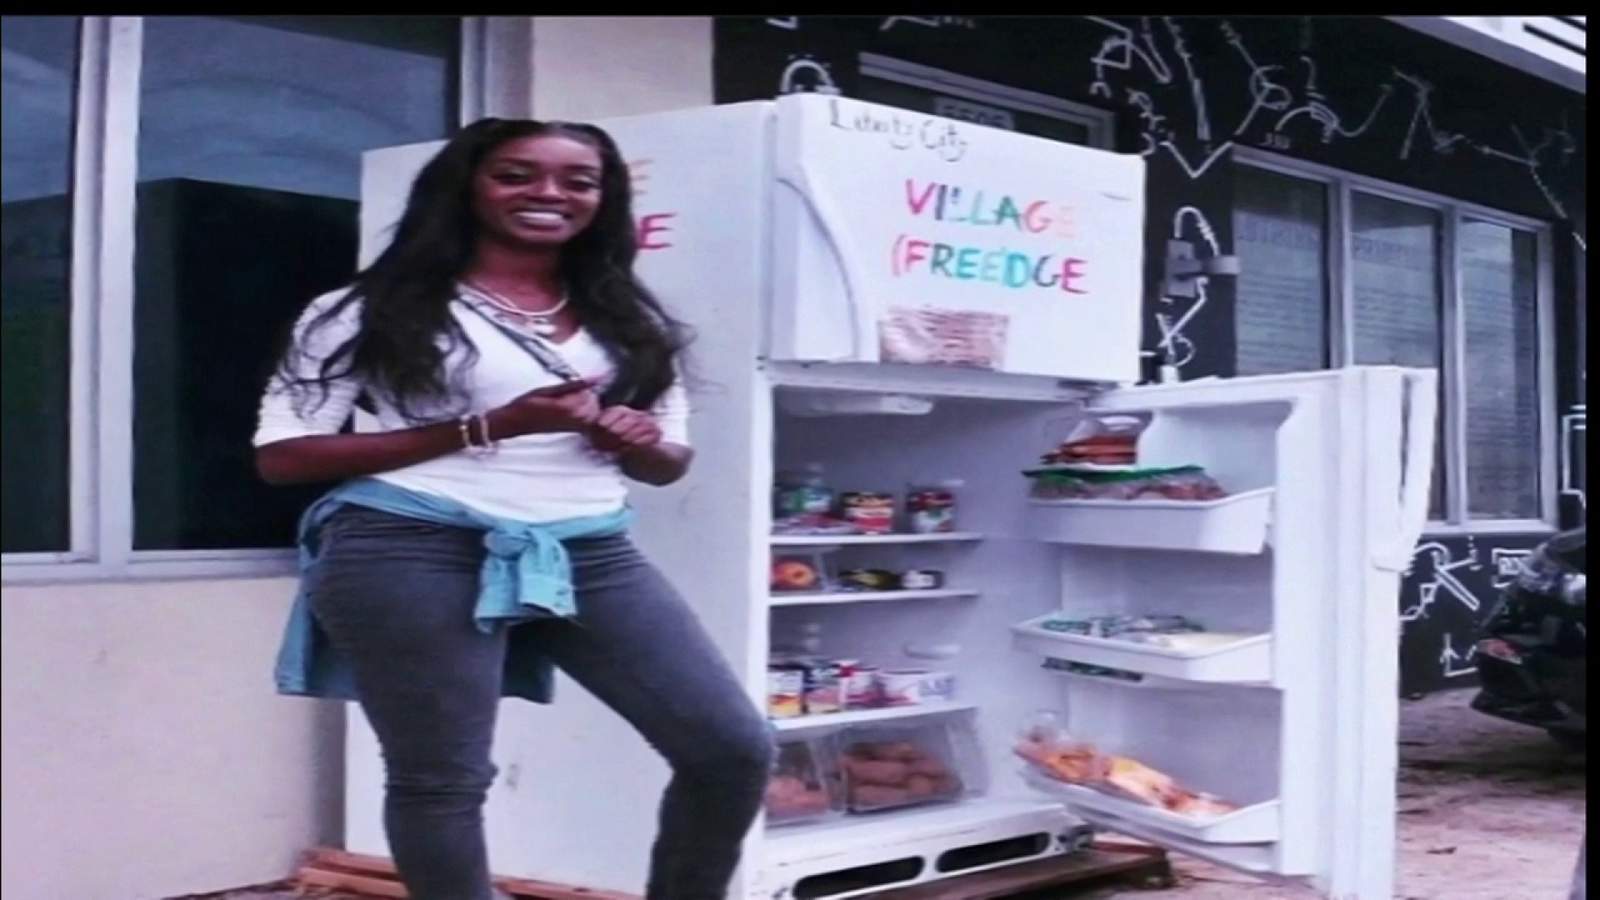 Holiday grinches steal ‘village’ fridge in Liberty City